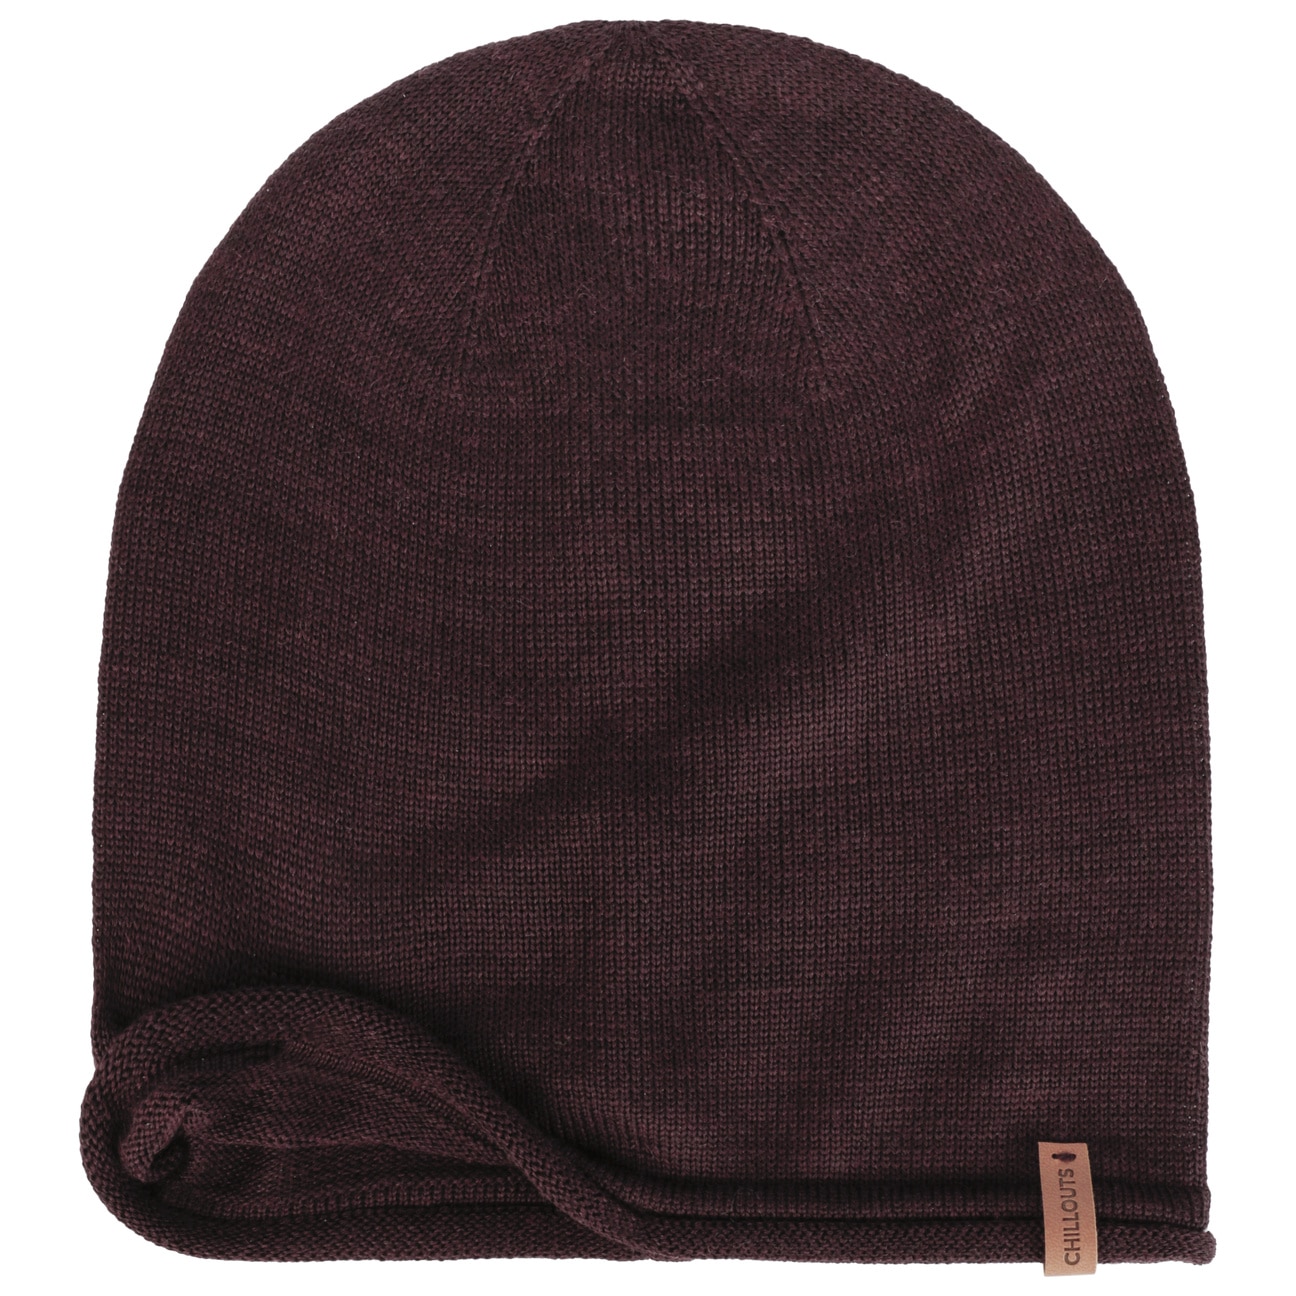 Berretto Beanie Leicester by € Chillouts - 27,99